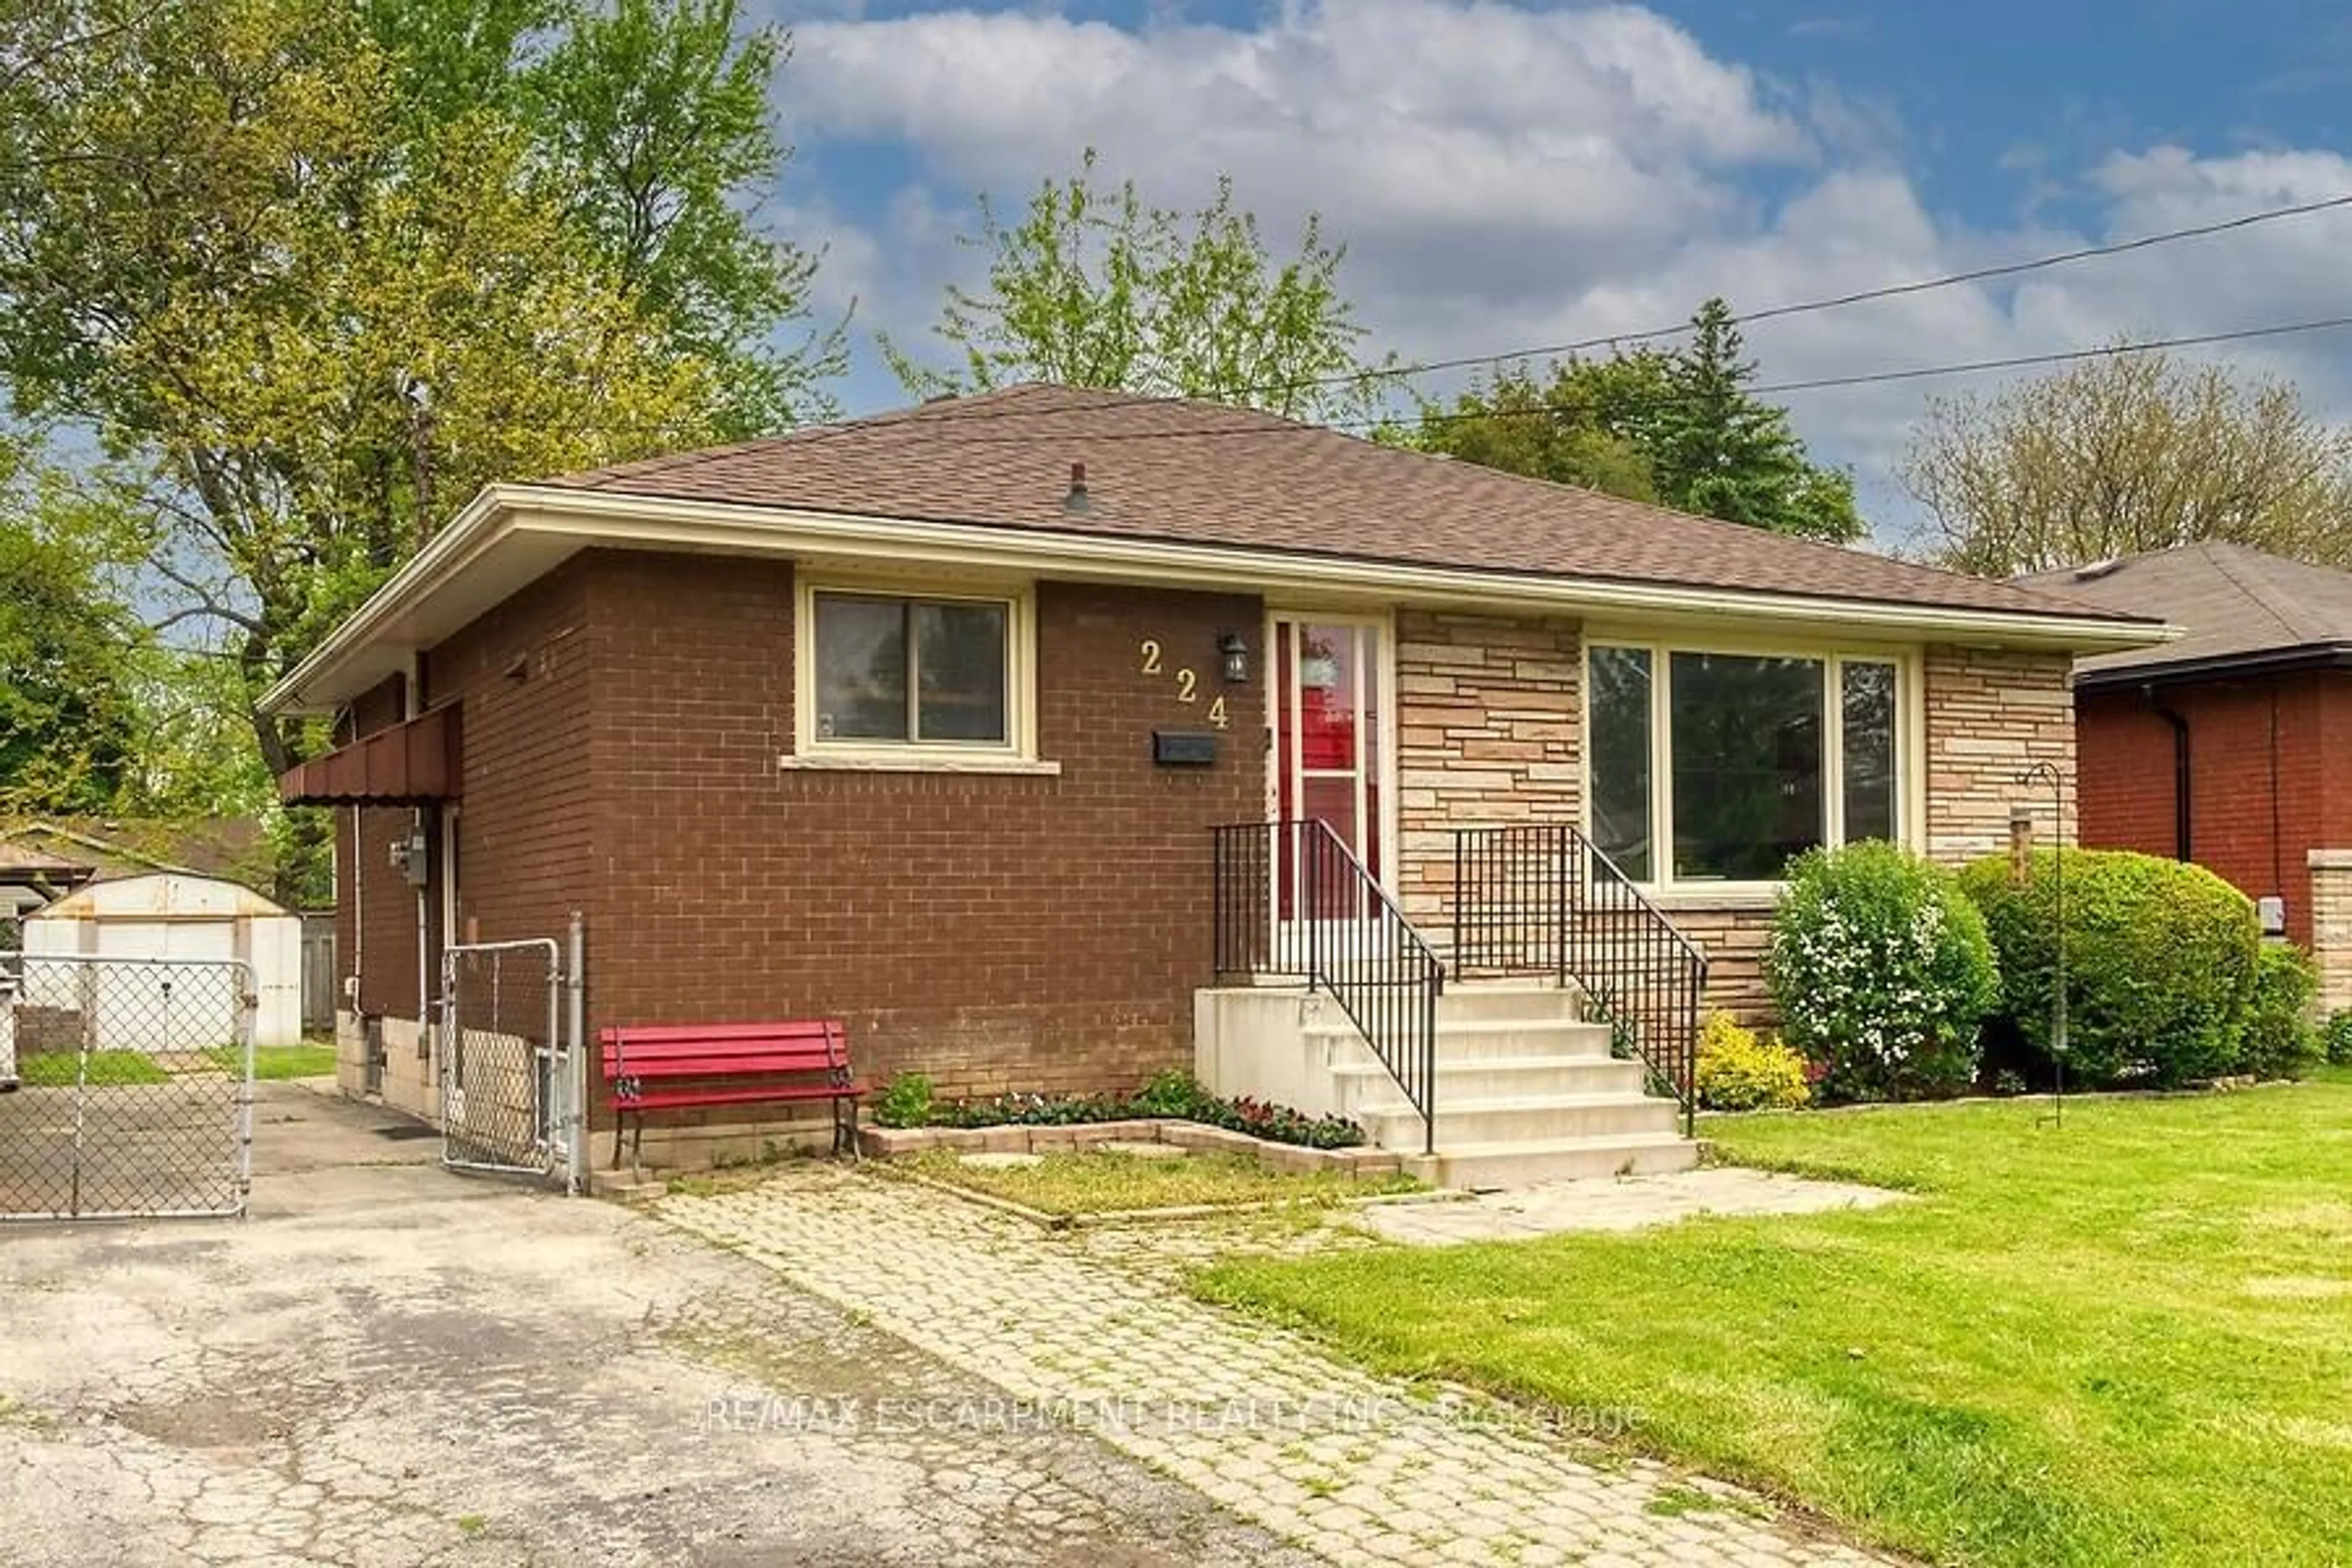 Home with brick exterior material for 224 West 18th St, Hamilton Ontario L9C 4G9